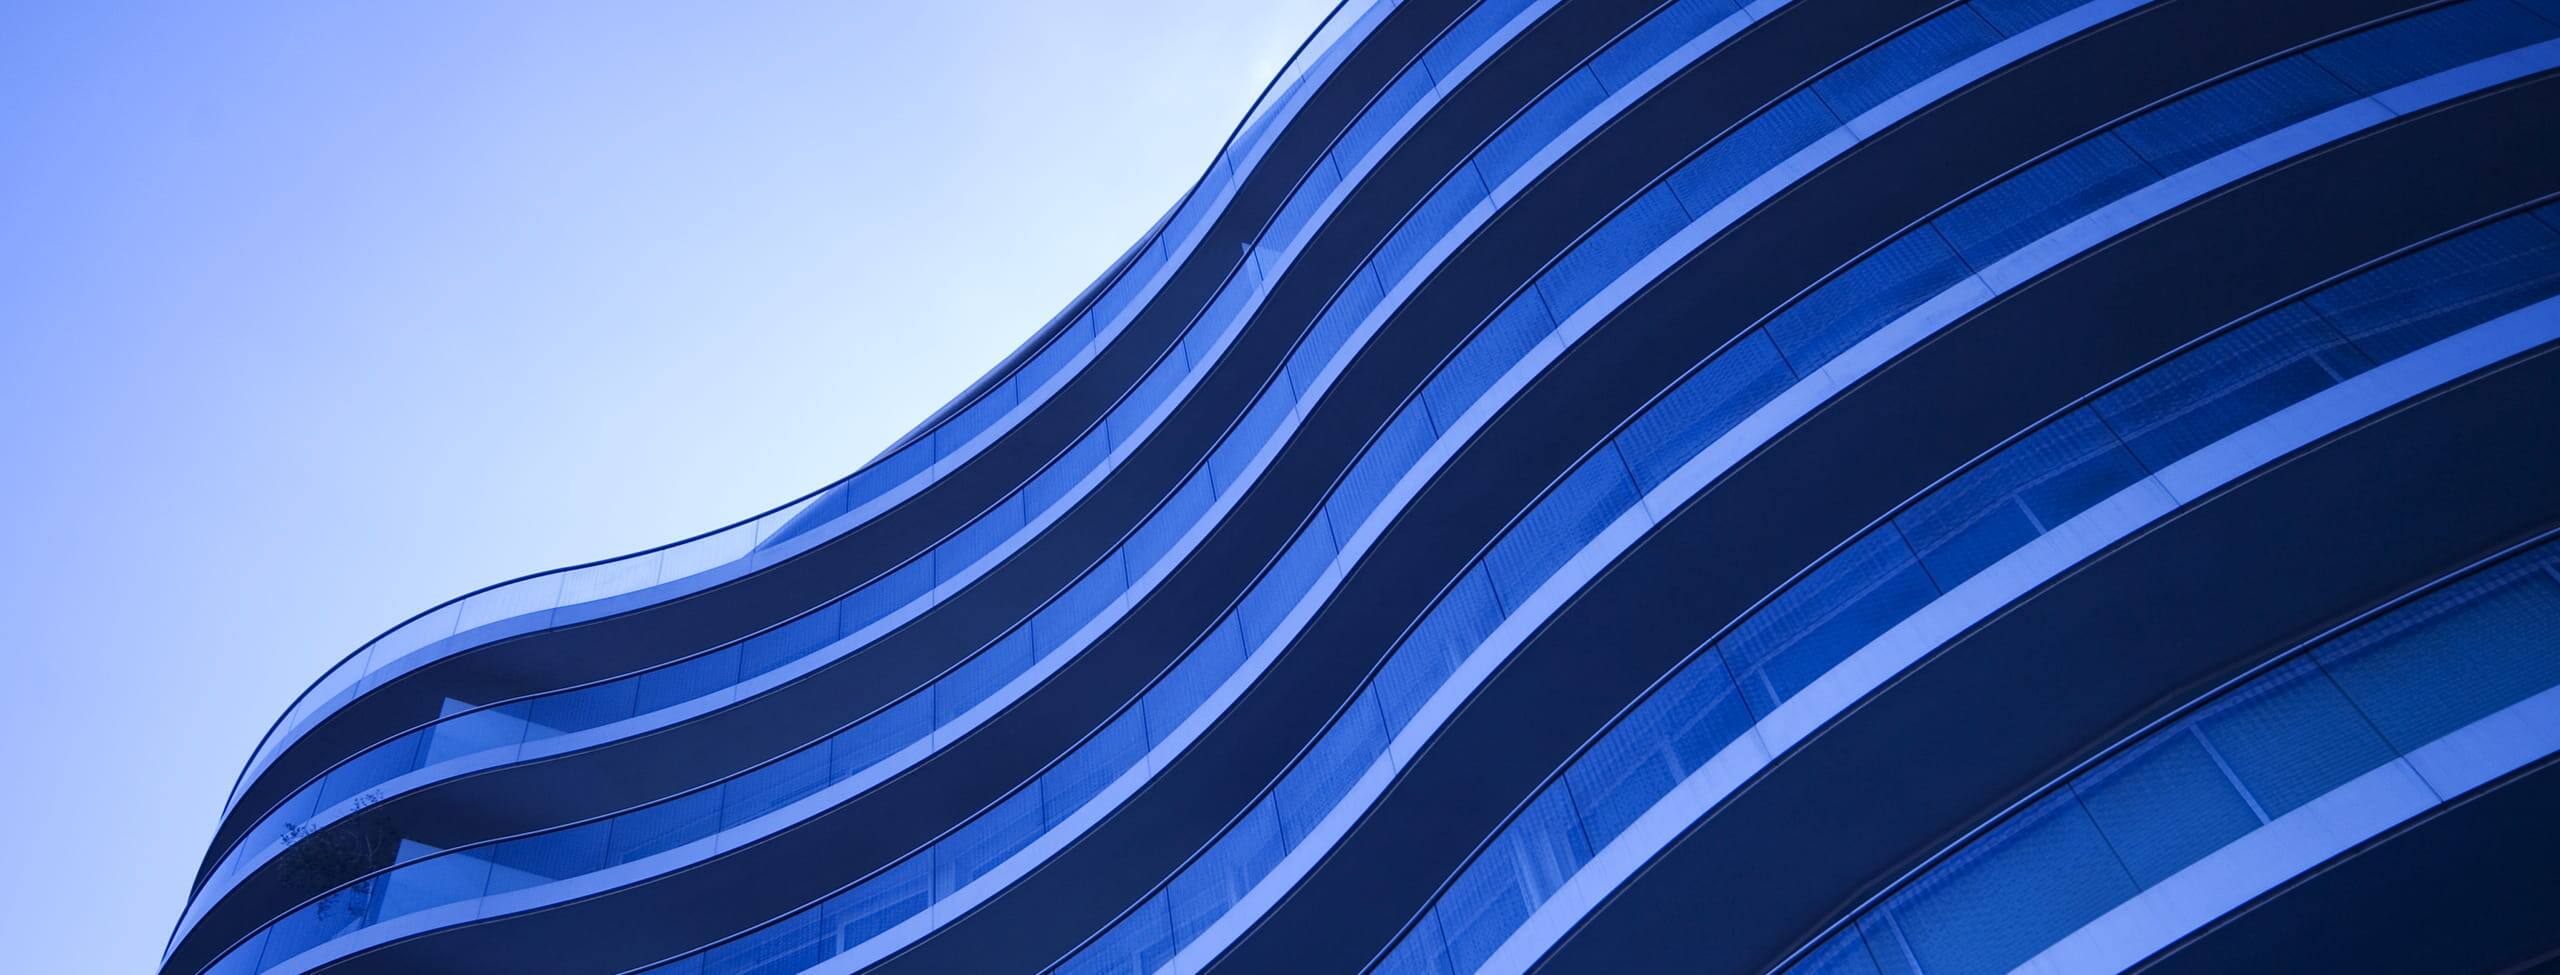 Abstract blue curved building